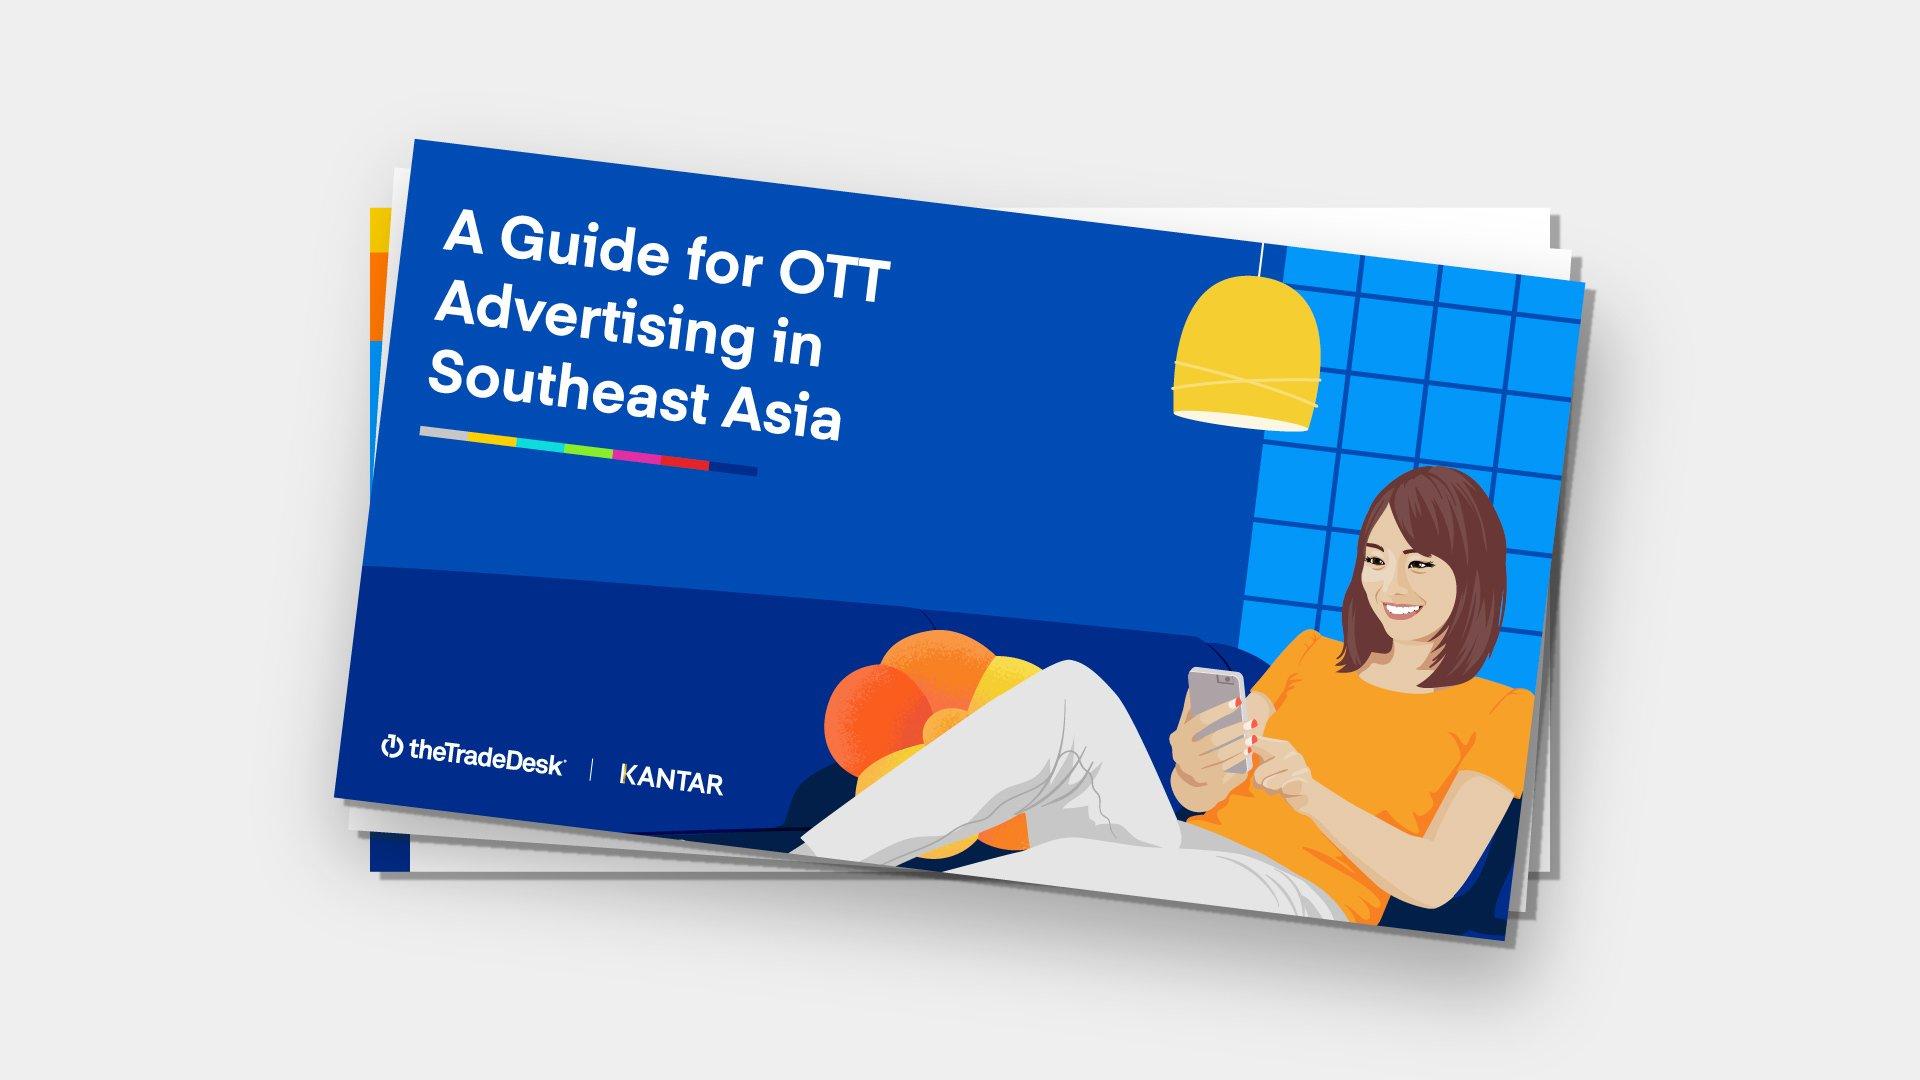 A Guide for OTT Advertising in Southeast Asia